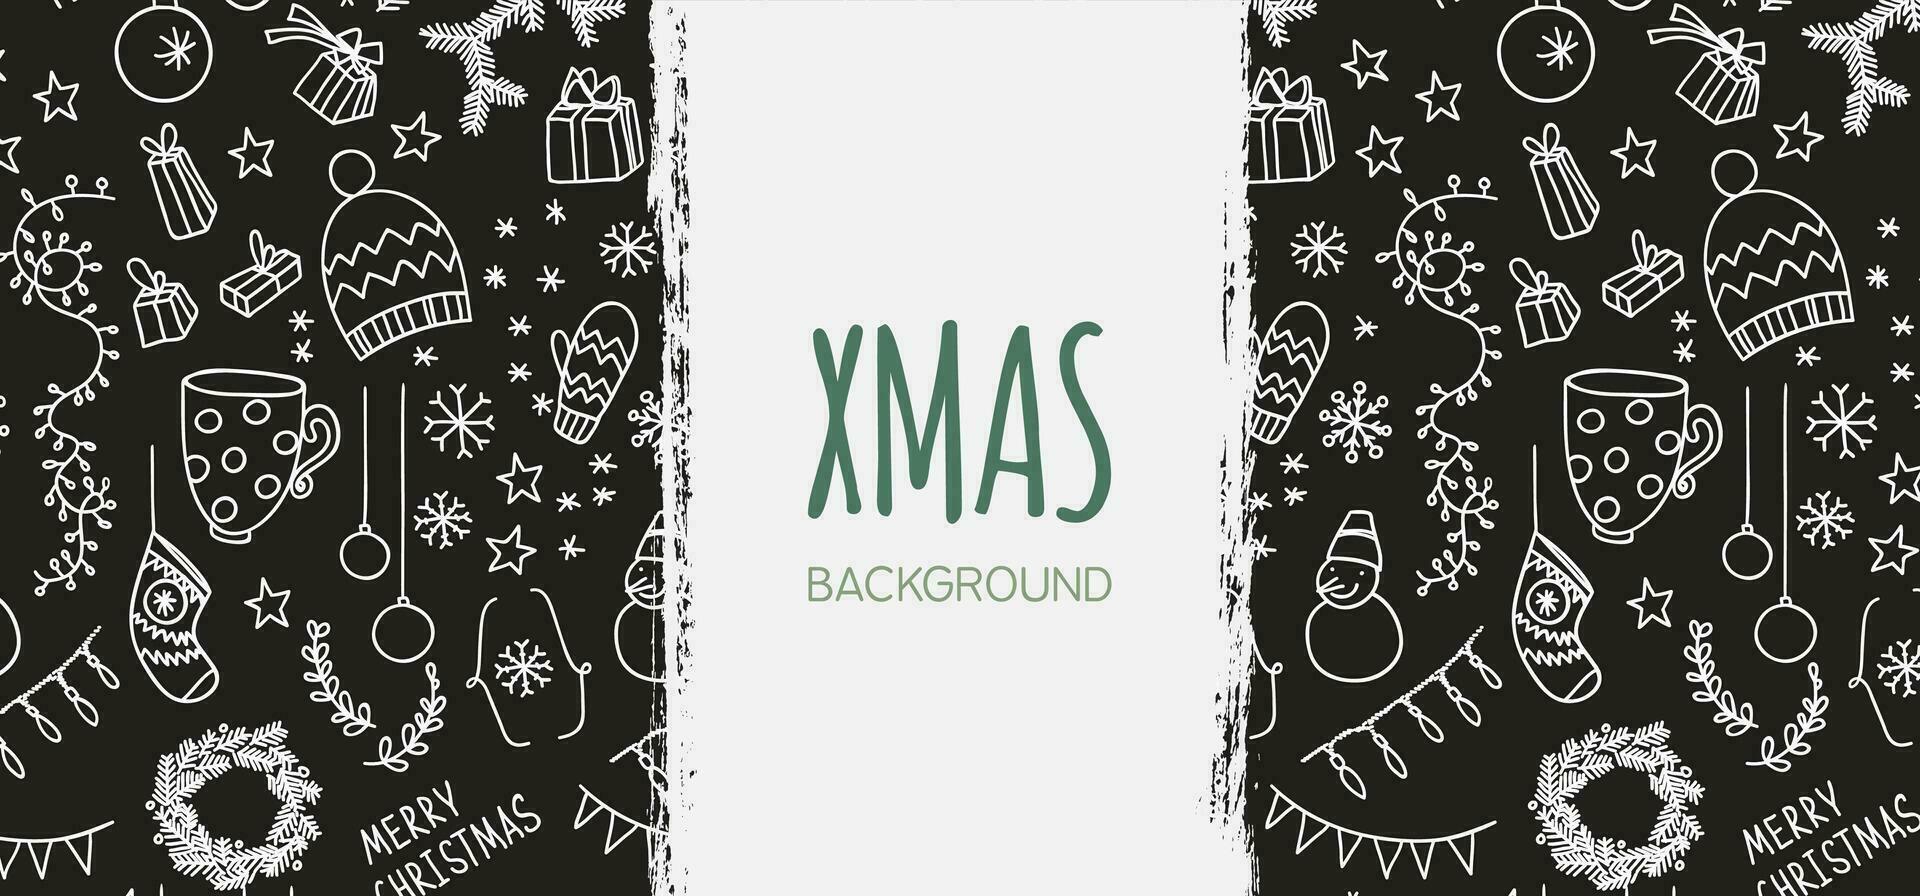 christmas background with hand drawn icons vector